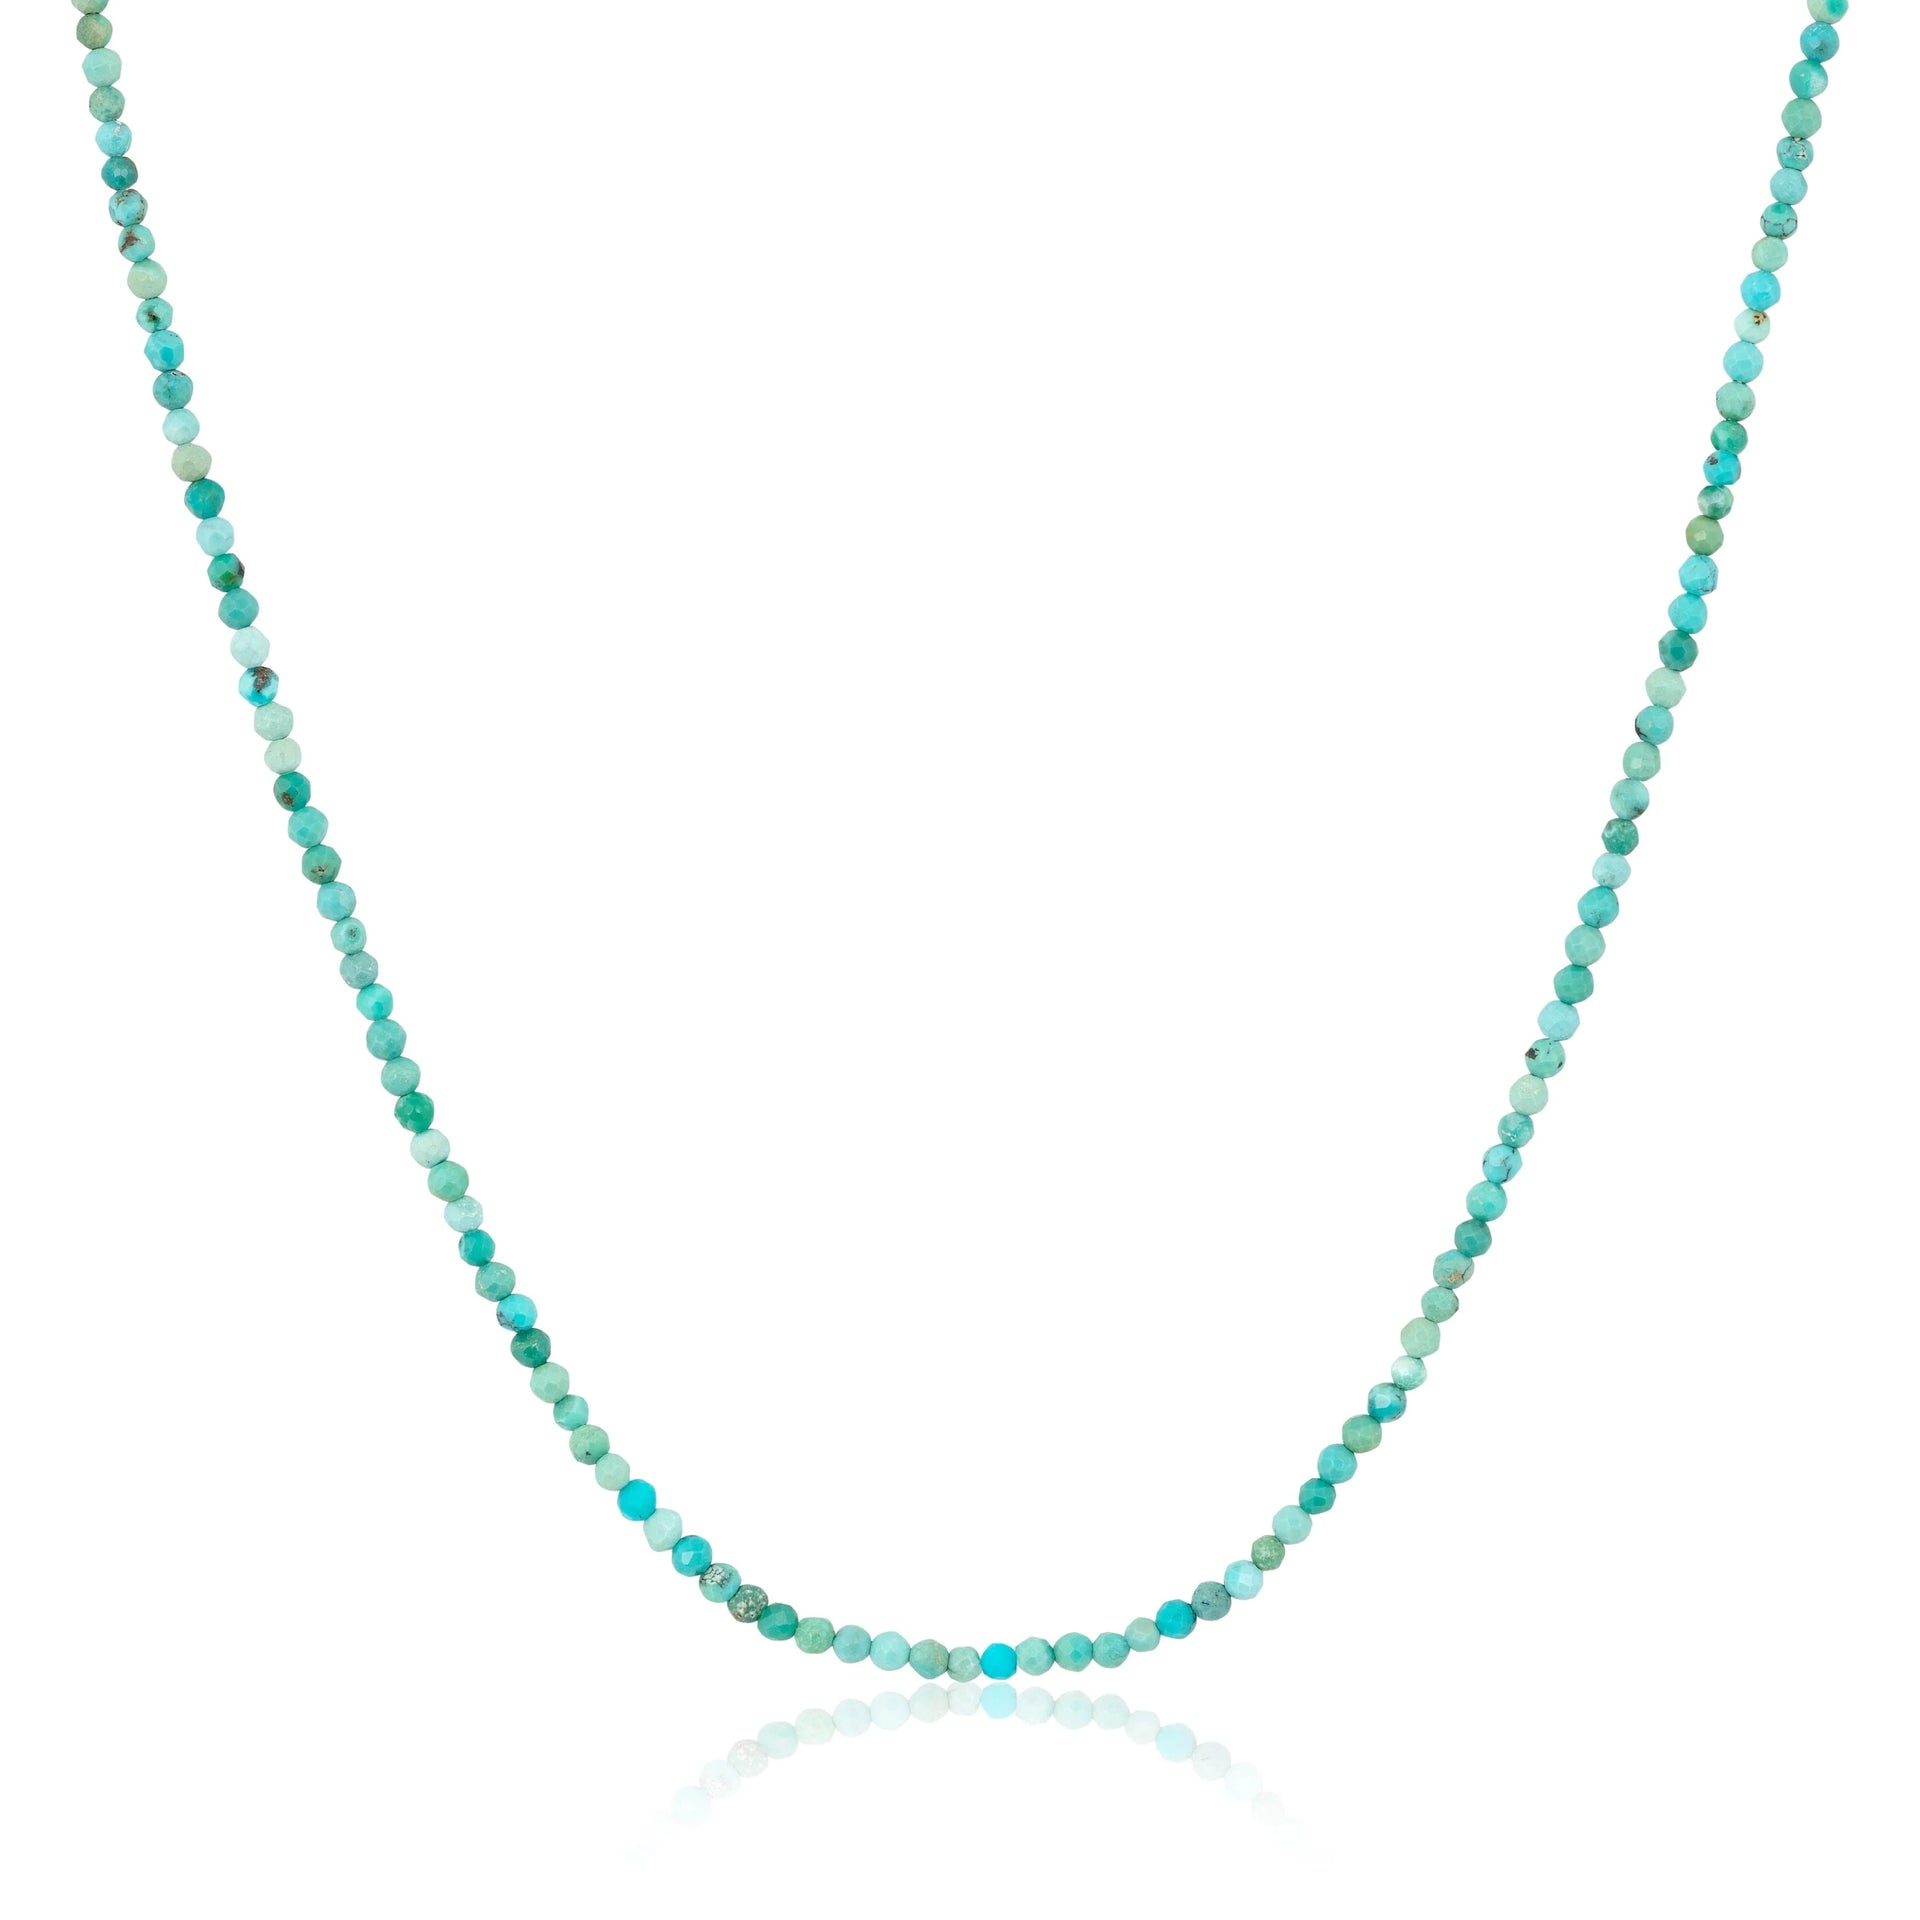 MINI CANDY NECKLACE - TURQUOISE